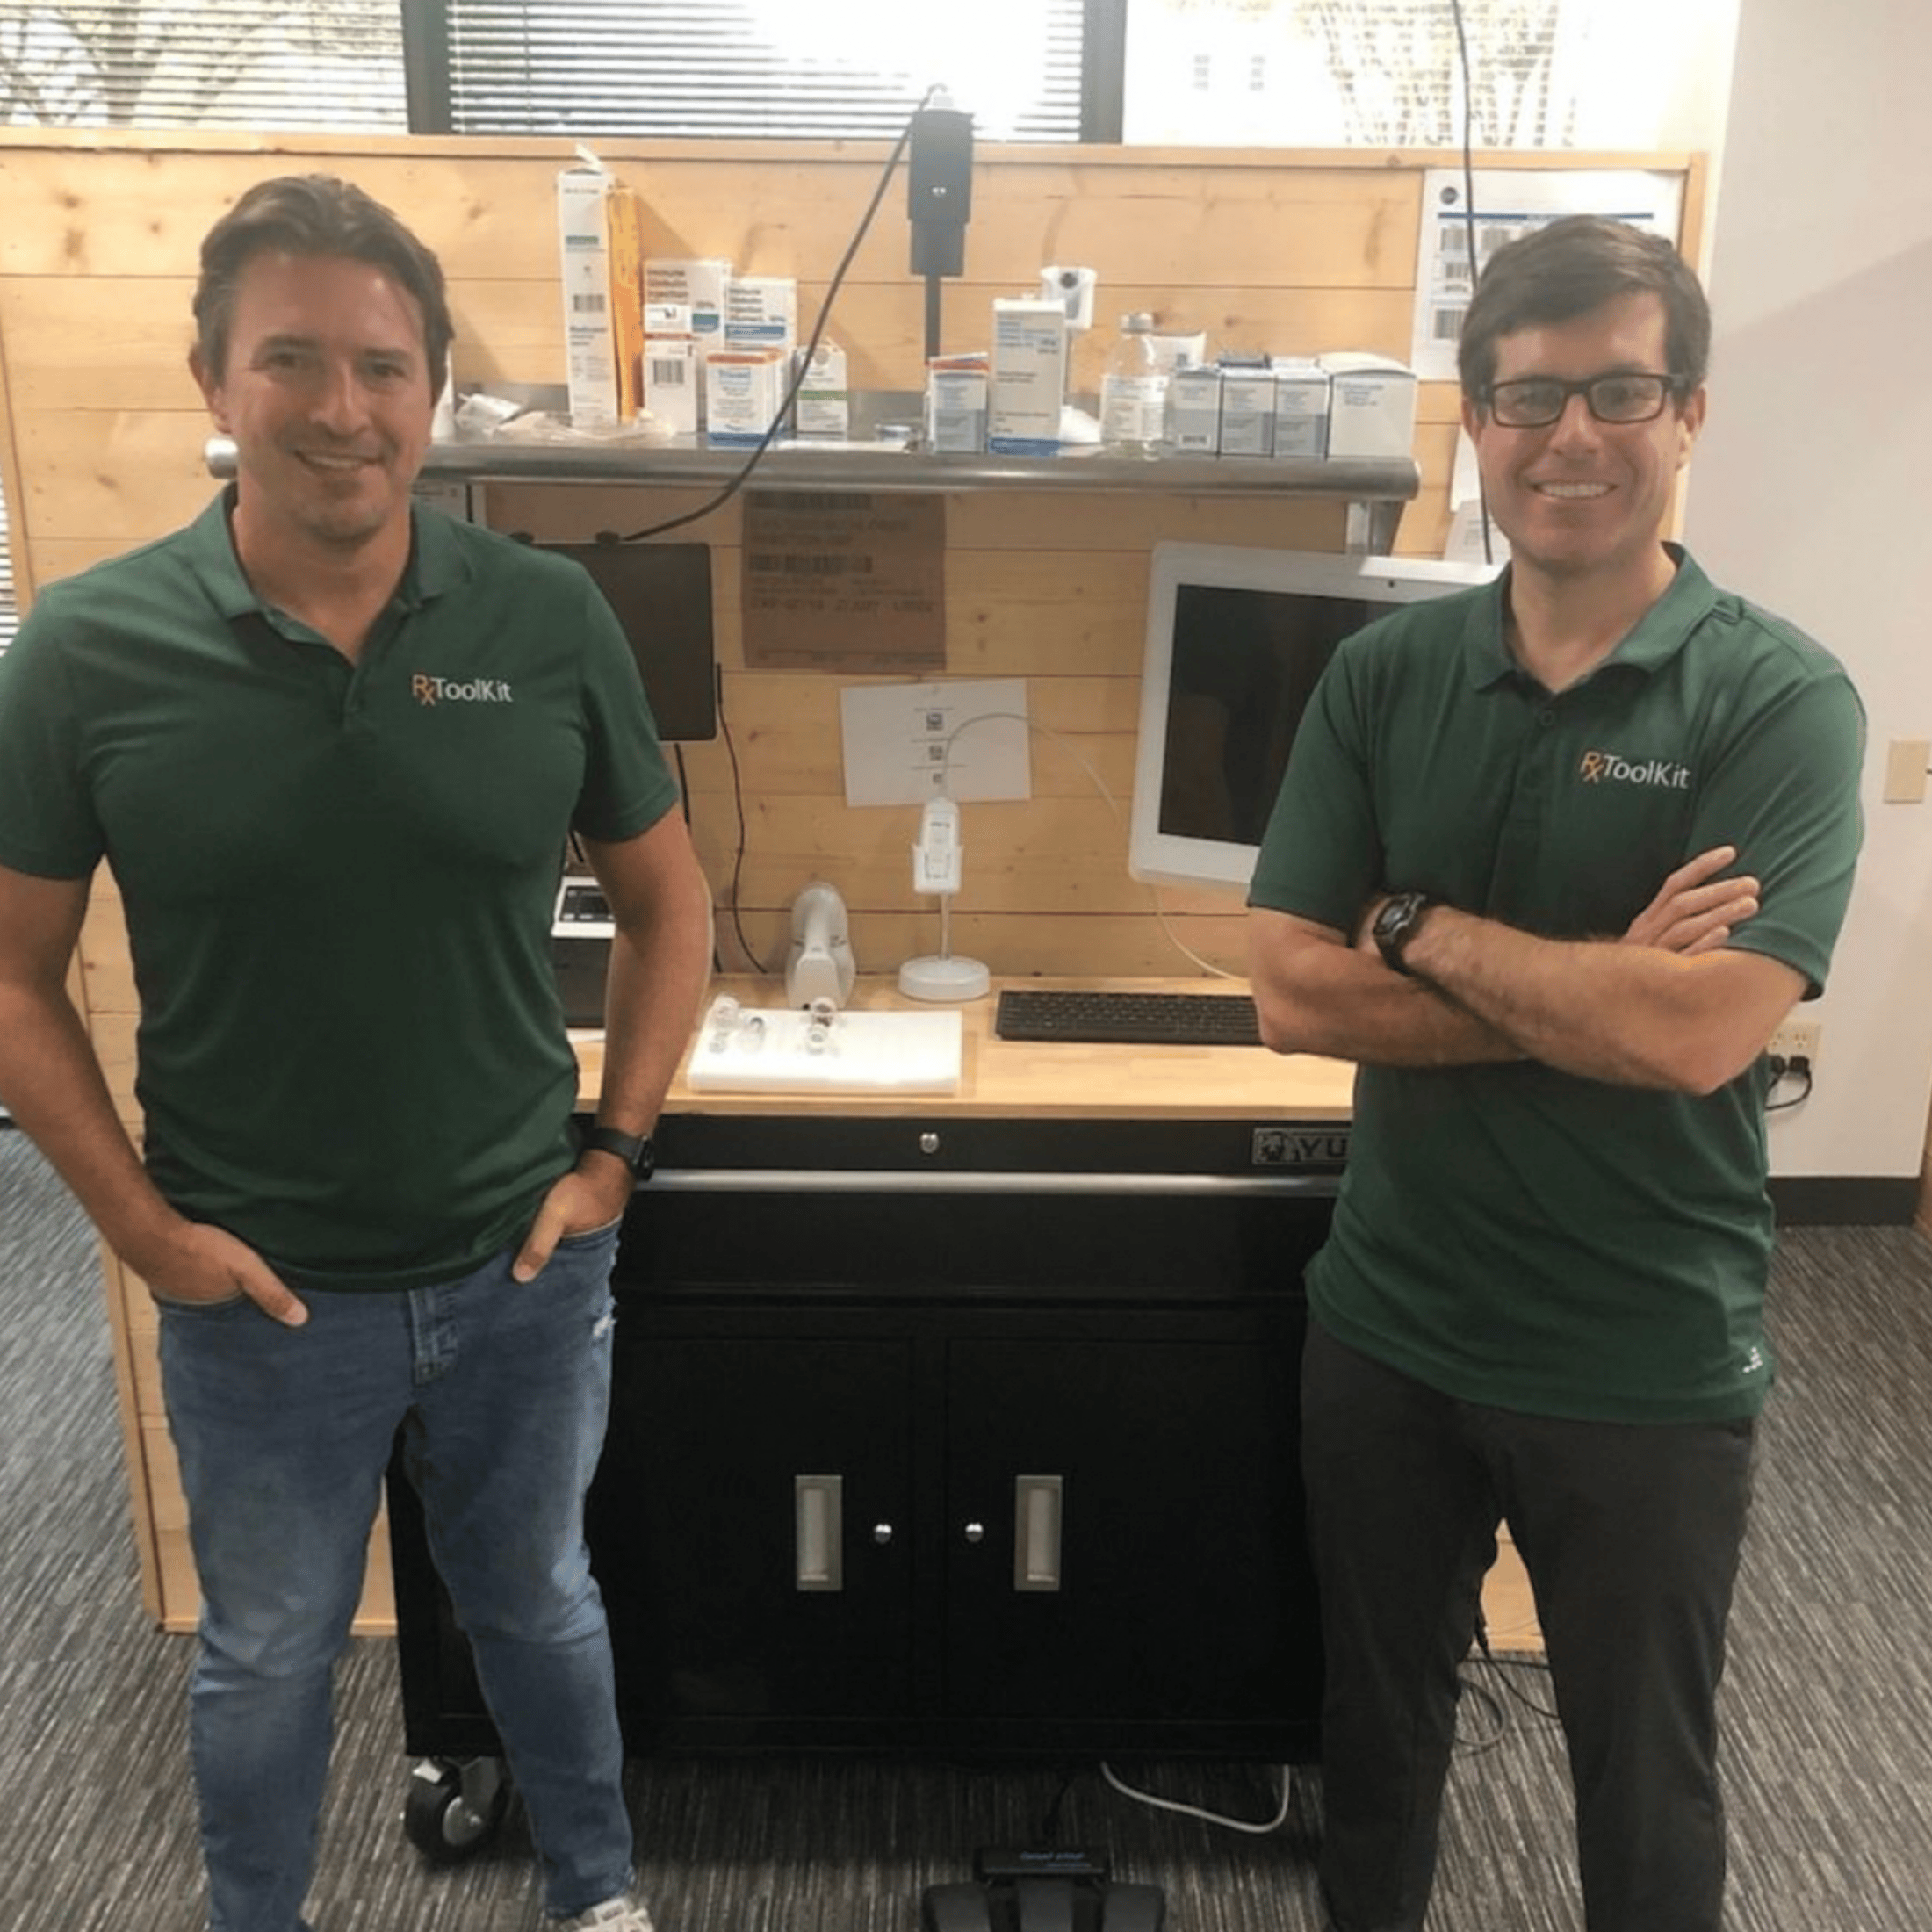 COO Reece and CEO Bryan in the Austin office with RxToolKit shirts on